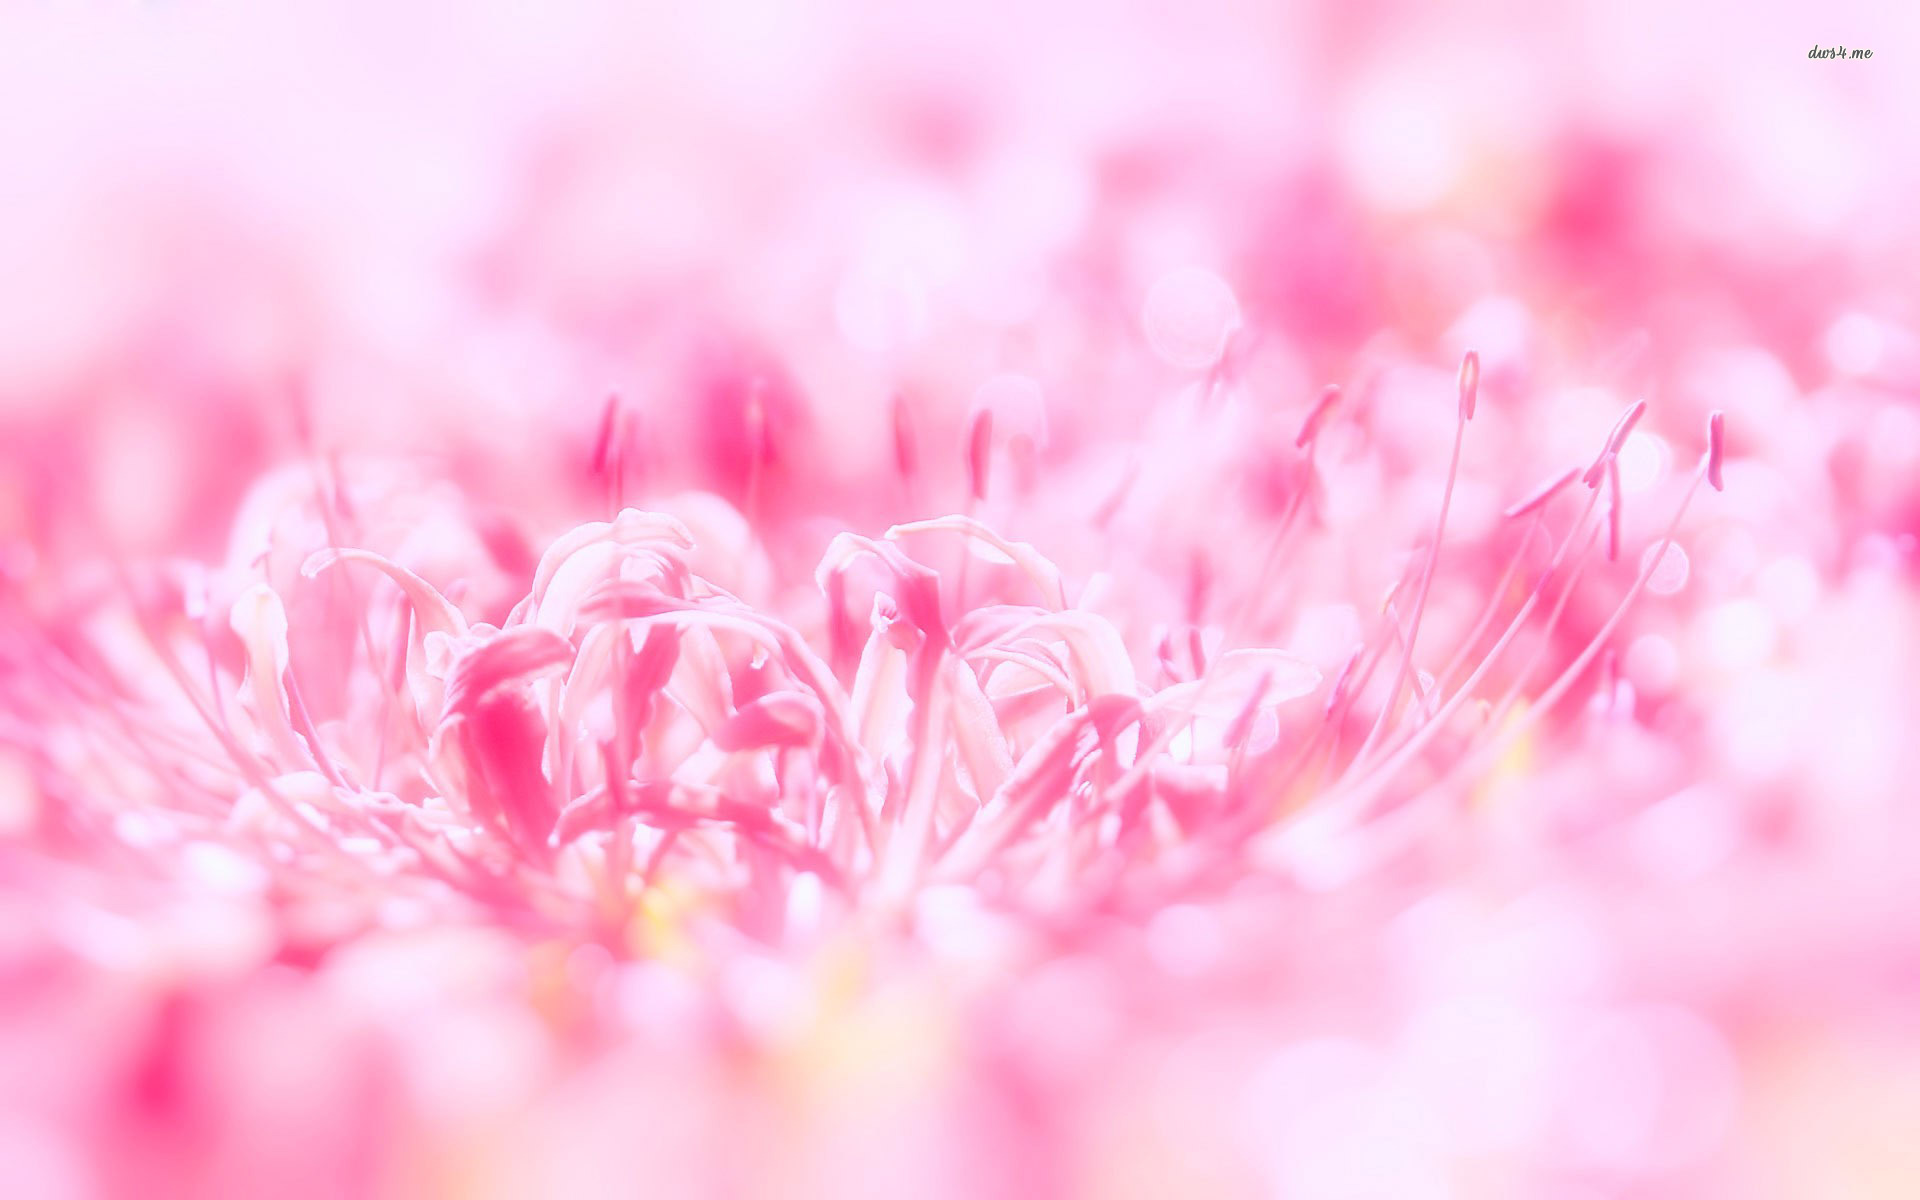 Pink Flowers Wallpaper HD Pictures Live Hq